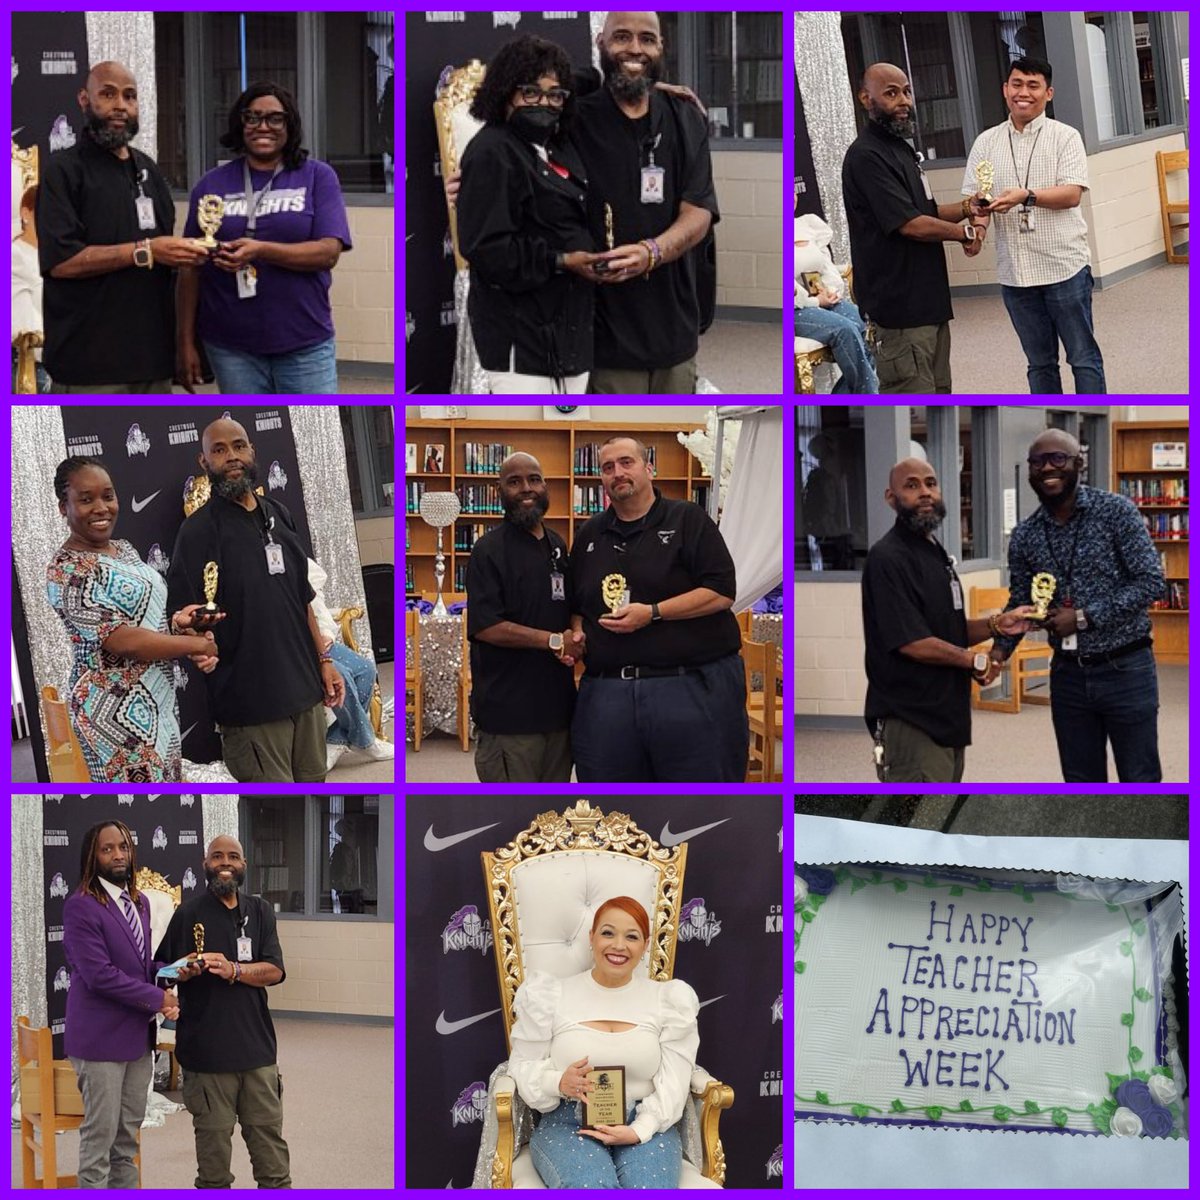 It is Teacher Appreciation Week!!! Those who wake and fight the fight daily please know you are appreciated and valued! To kick off at the Castle we did a Cake and Ice Cream social and gave out staff awards. #ShieldsUp🛡️⚔️